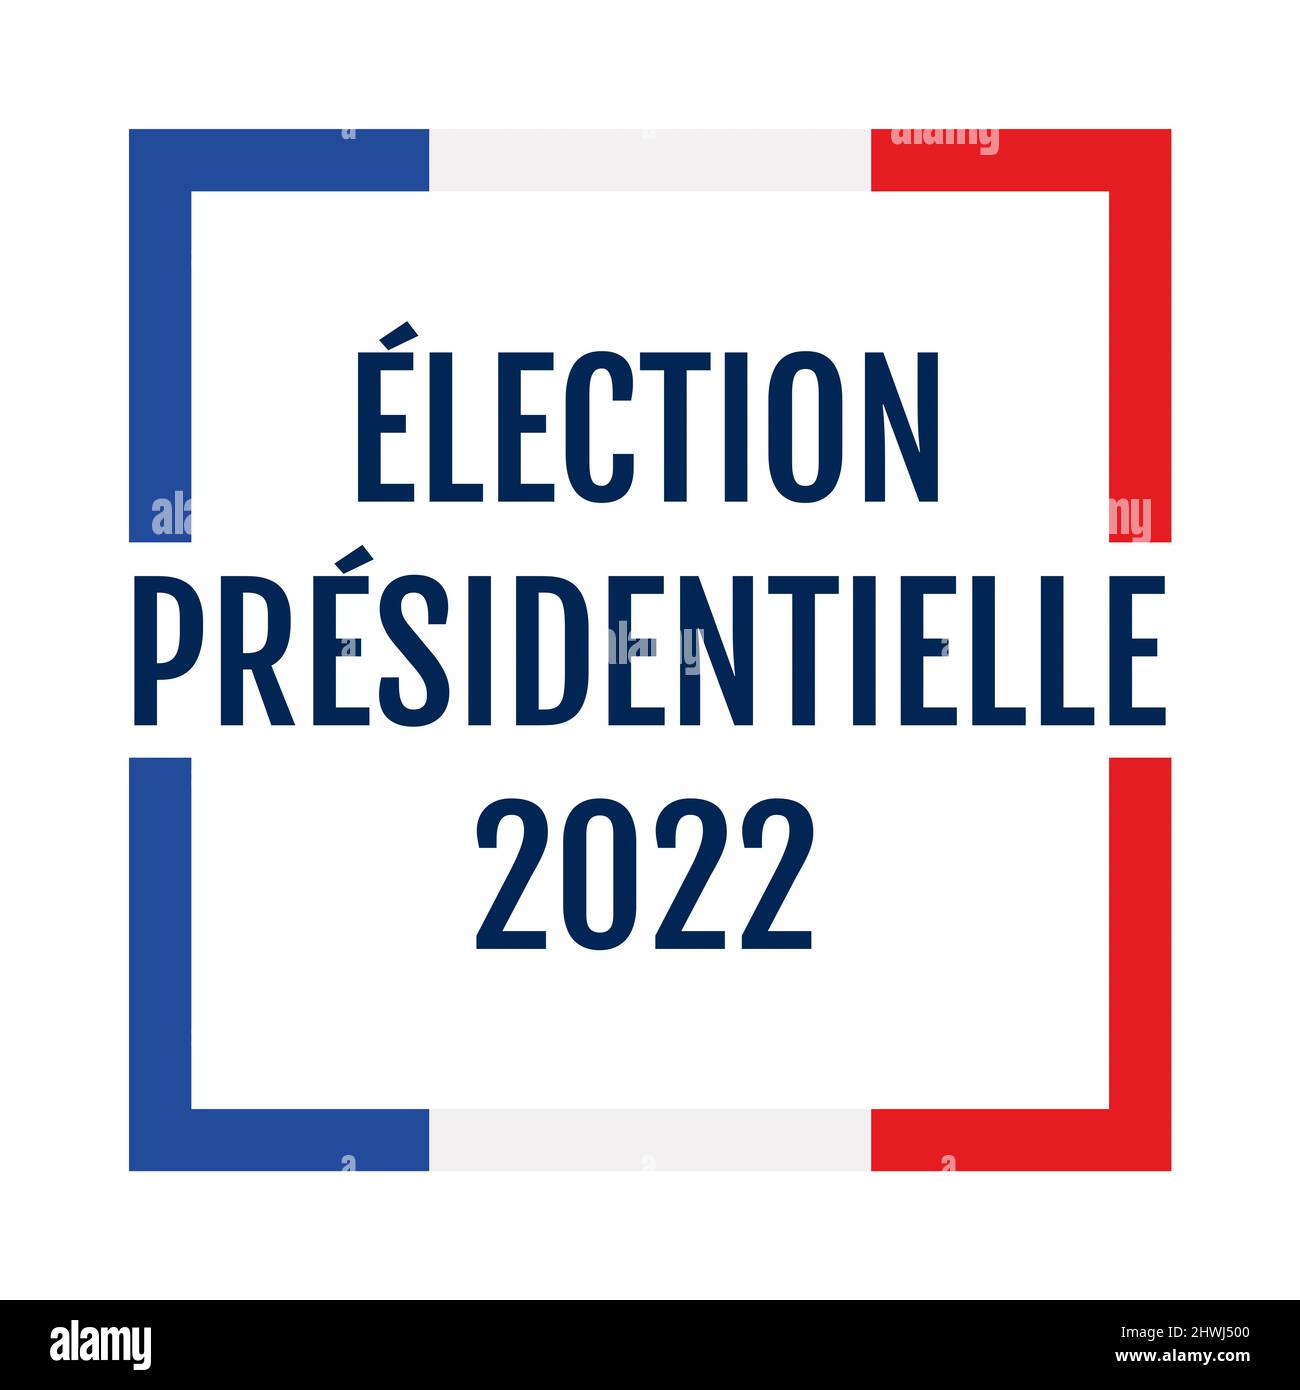 French presidential election in 2022 symbol called election presidentielle 2022 in french language Stock Photo